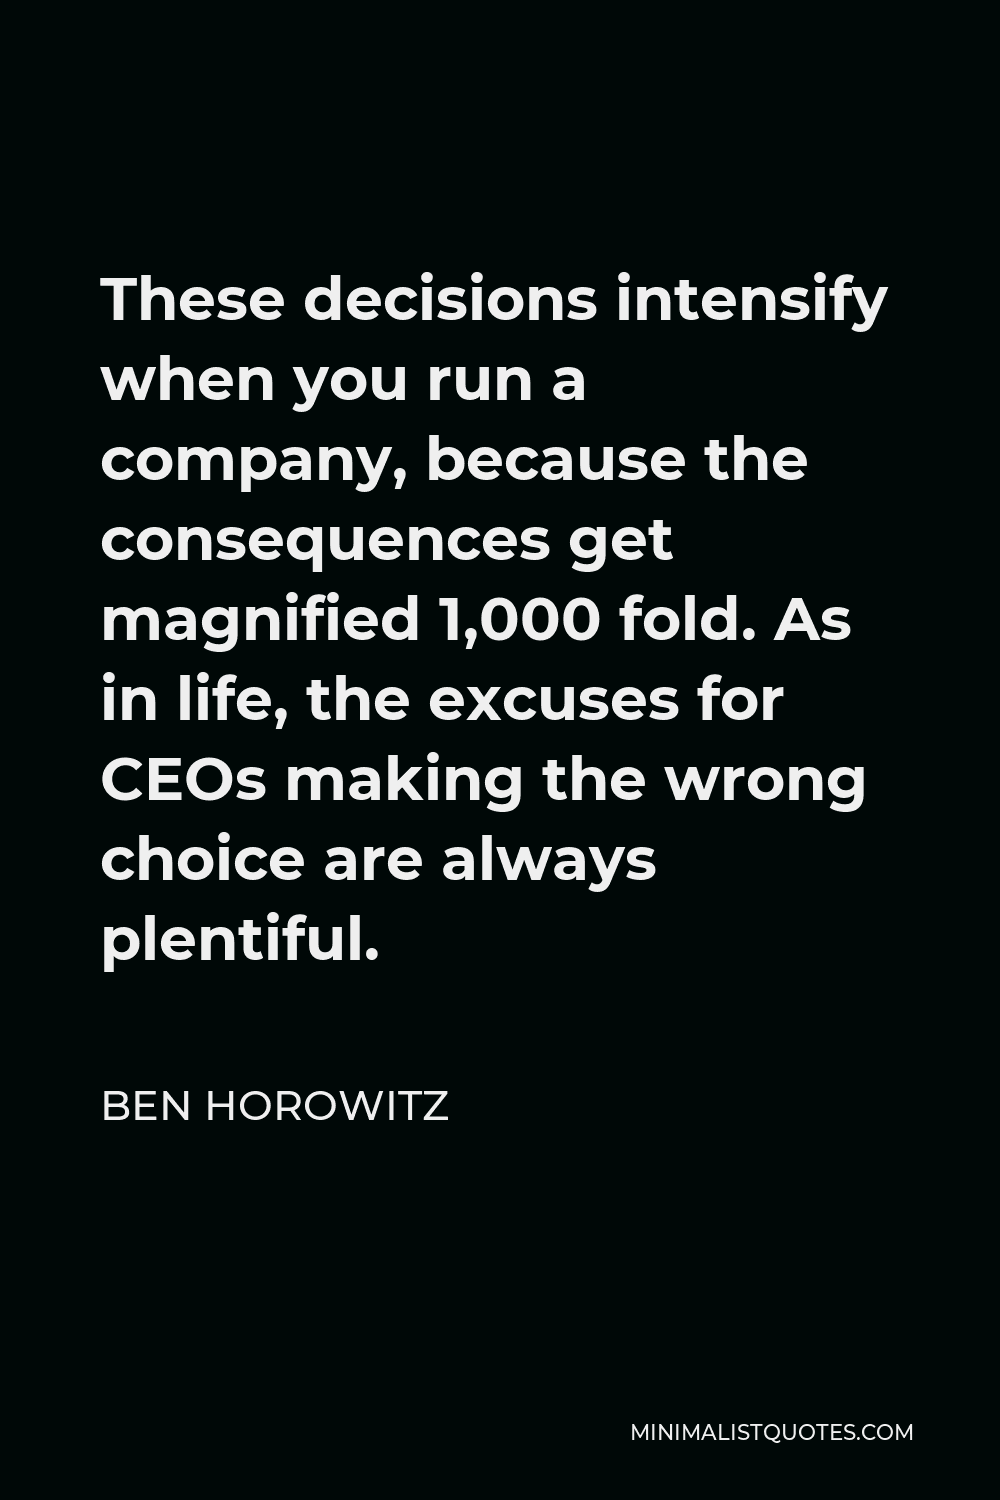 Ben Horowitz Quote - These decisions intensify when you run a company, because the consequences get magnified 1,000 fold. As in life, the excuses for CEOs making the wrong choice are always plentiful.